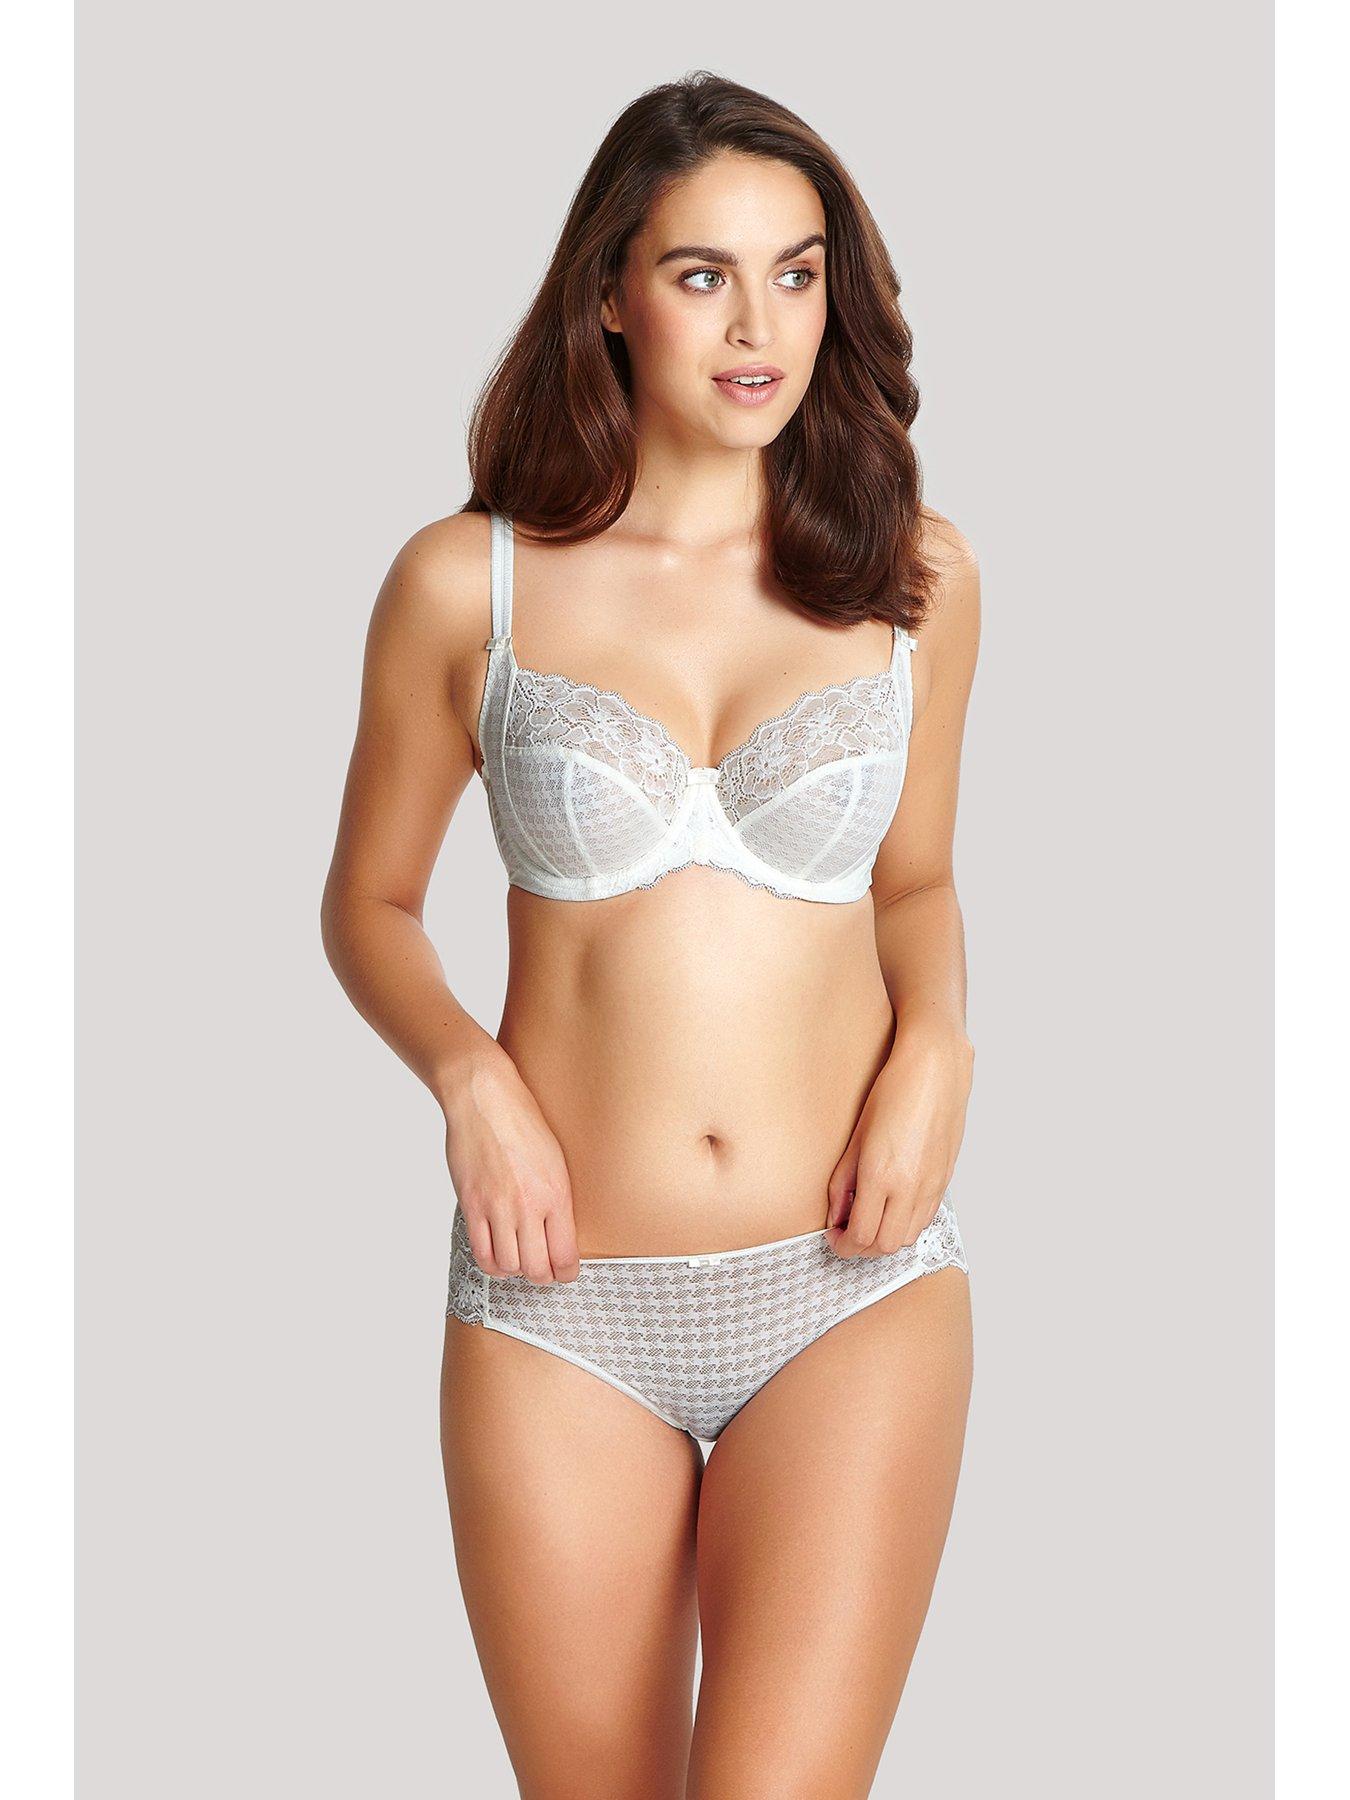 Panache Envy Full Cup Bra in Orchid FINAL SALE (30% Off) - Busted Bra Shop